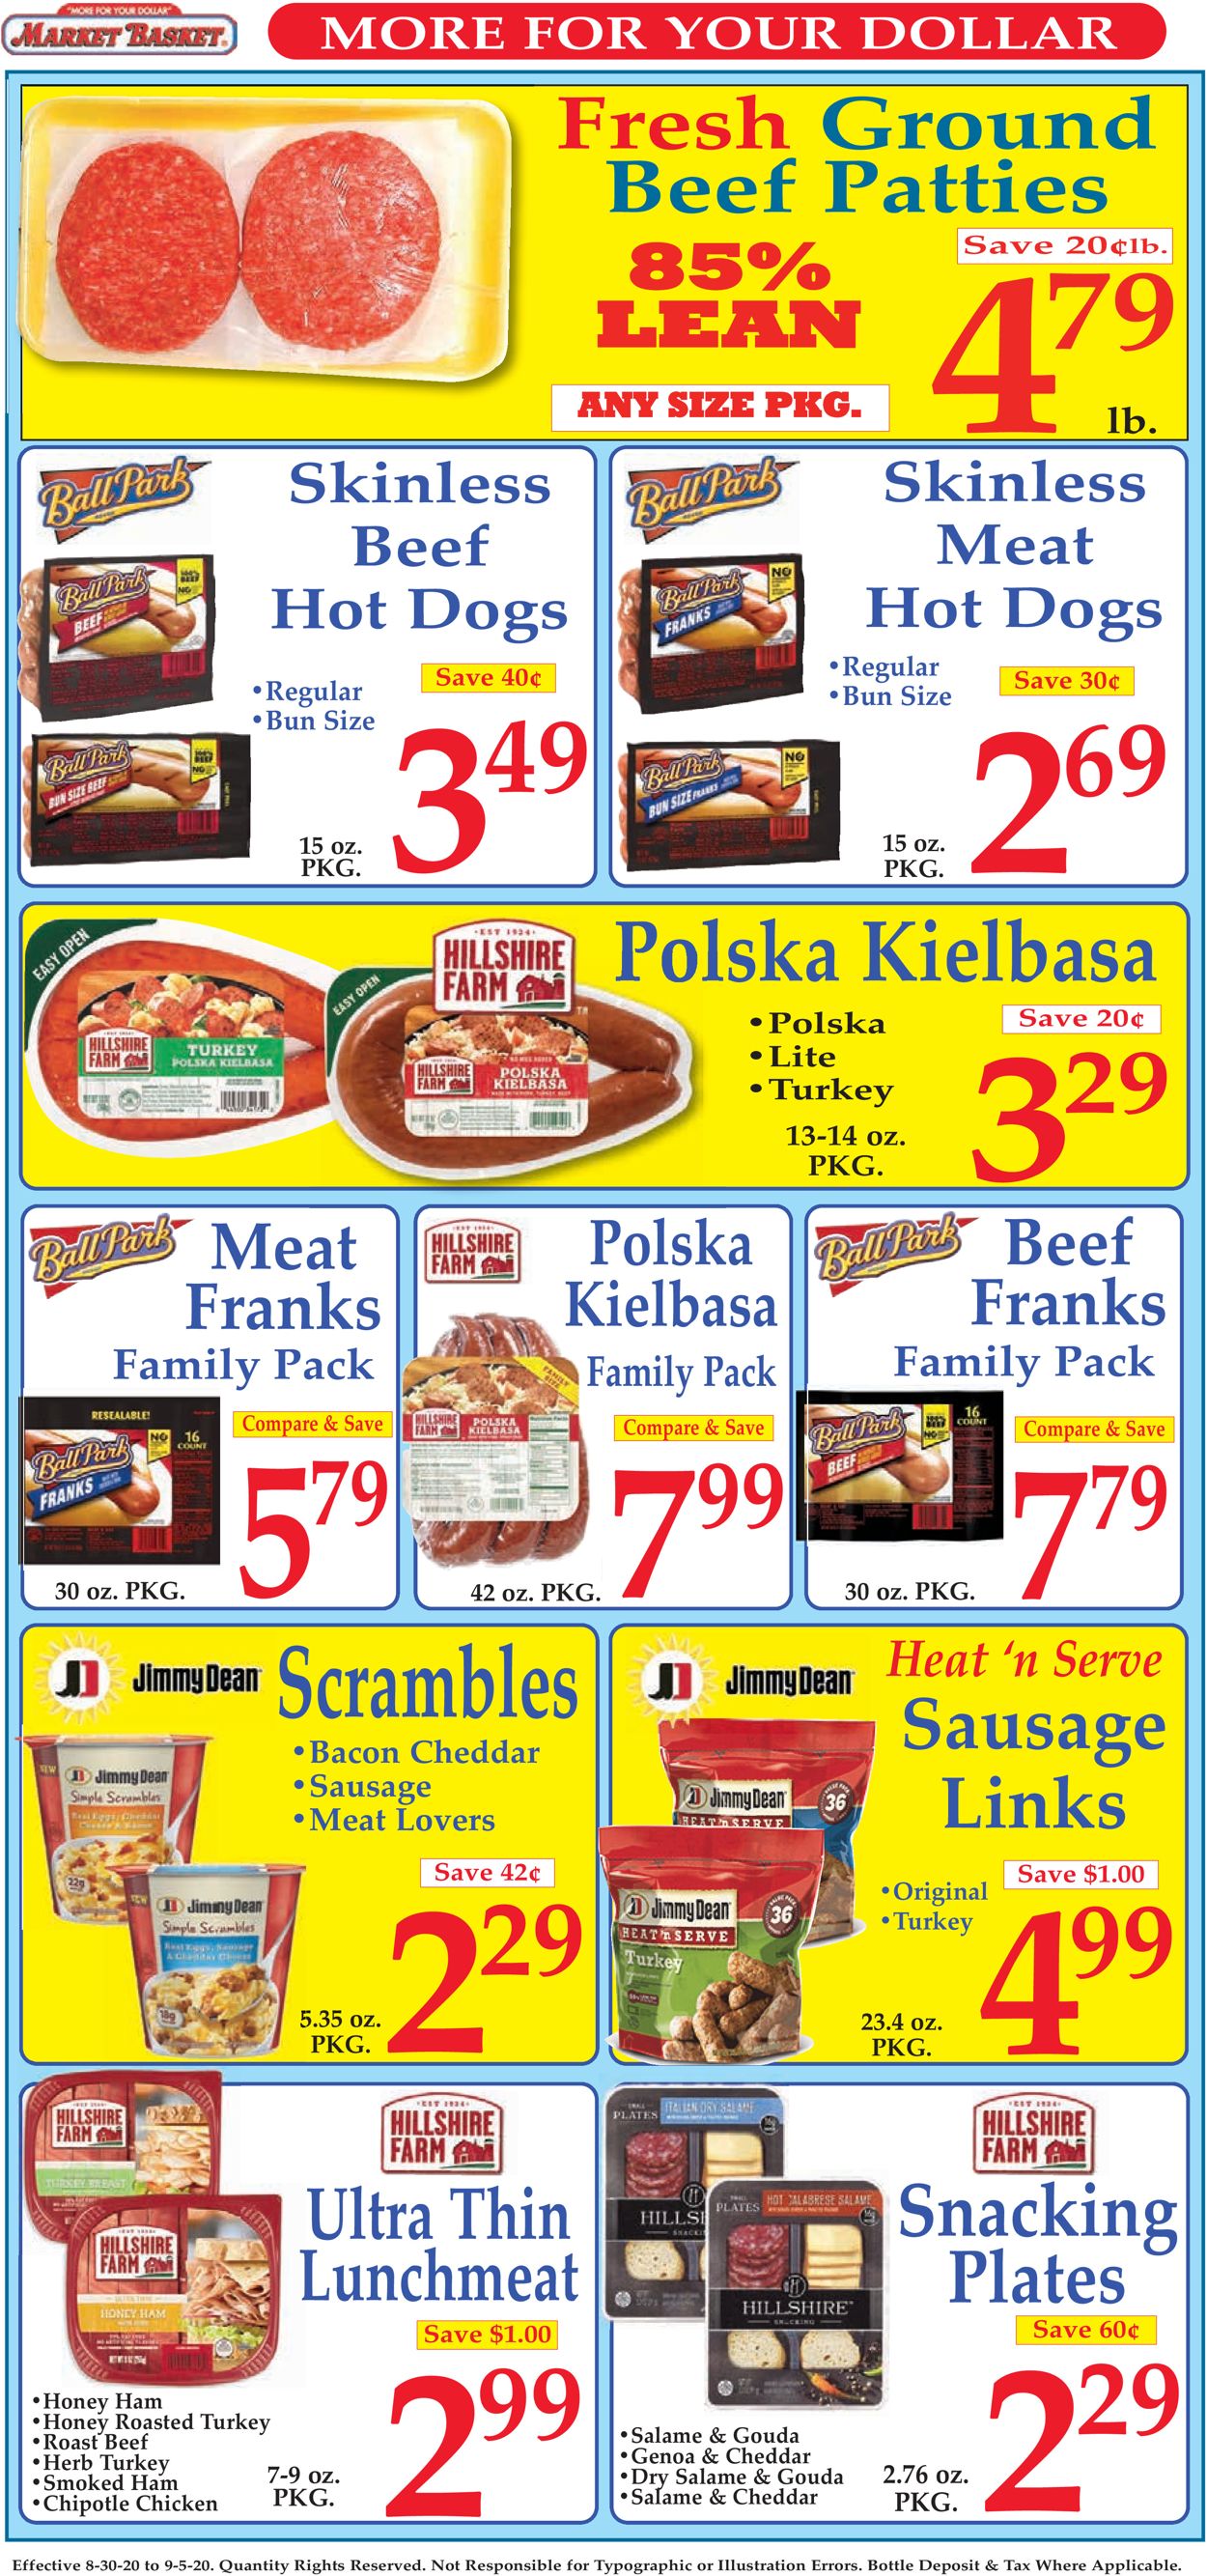 Market Basket Ad from 08/30/2020